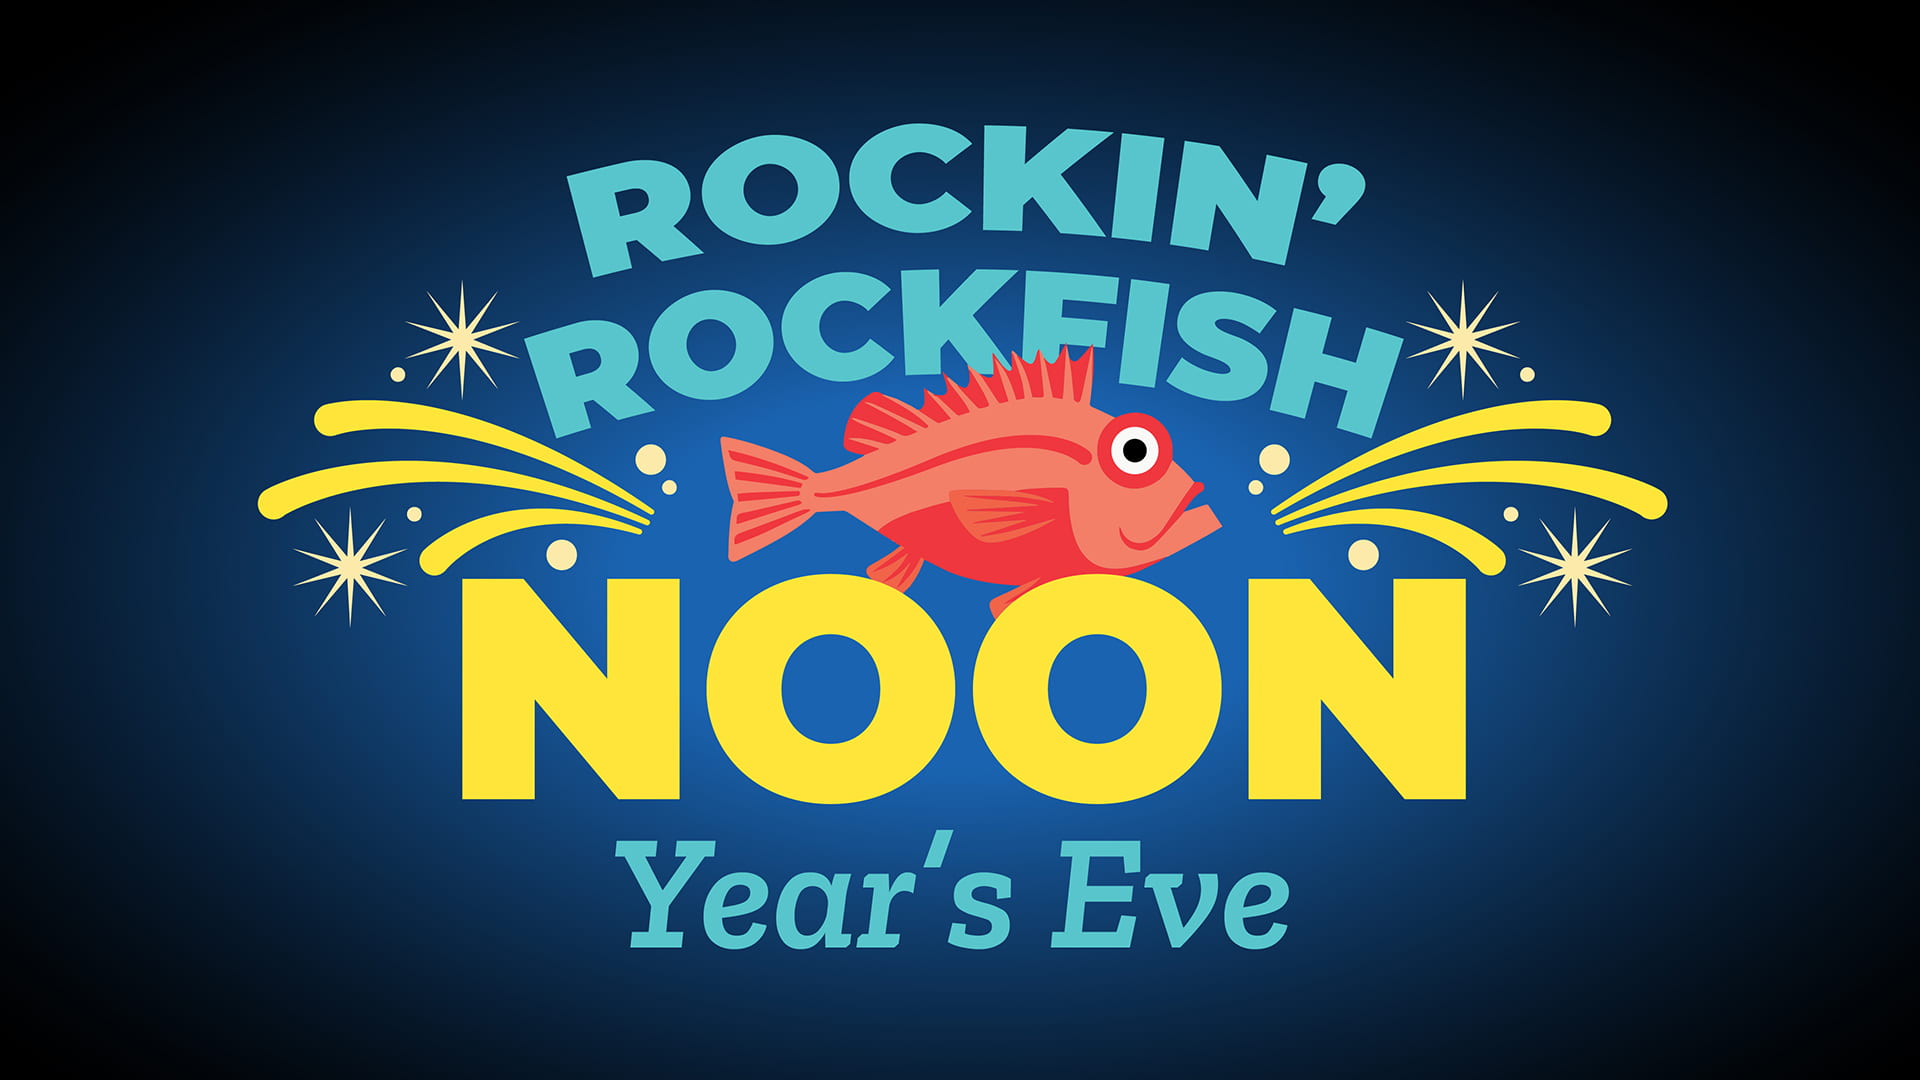 A banner that reads "Rockin' Rockfish Noon Year's Eve." It features an illustration of an orange rockfish and yellow fireworks.